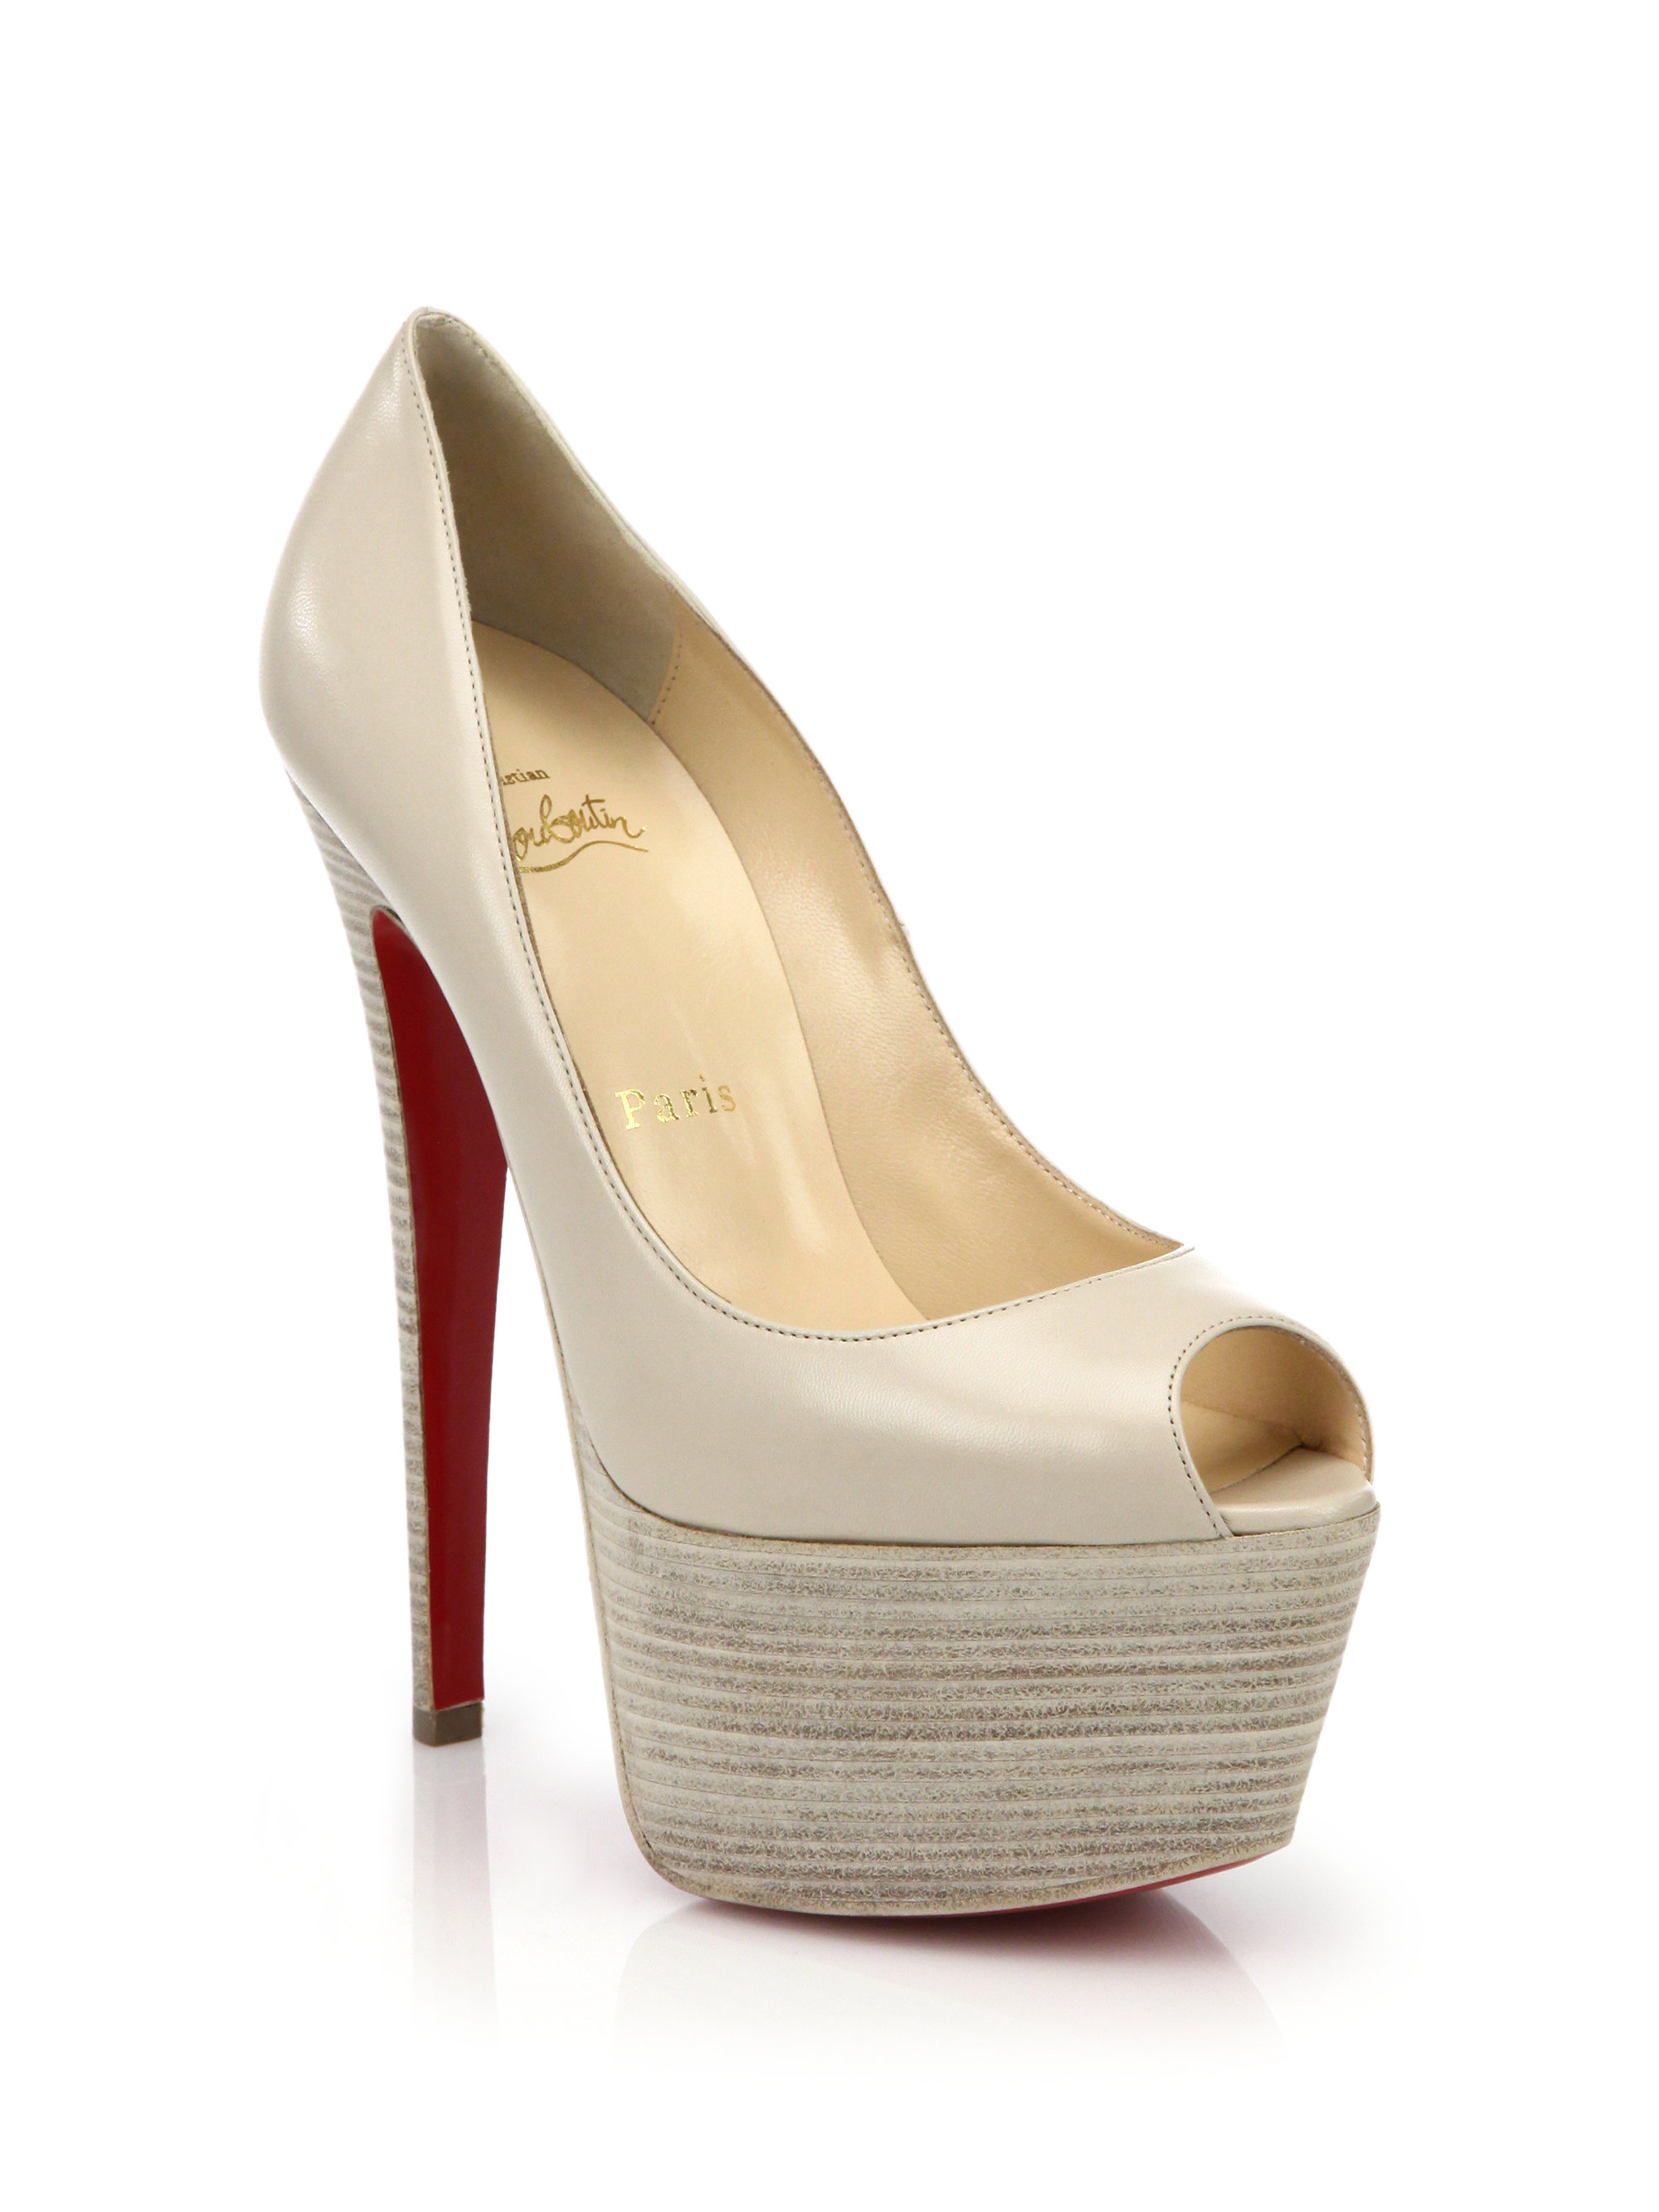 Lyst - Christian louboutin Jamie Patent Leather Platform Pumps in Natural